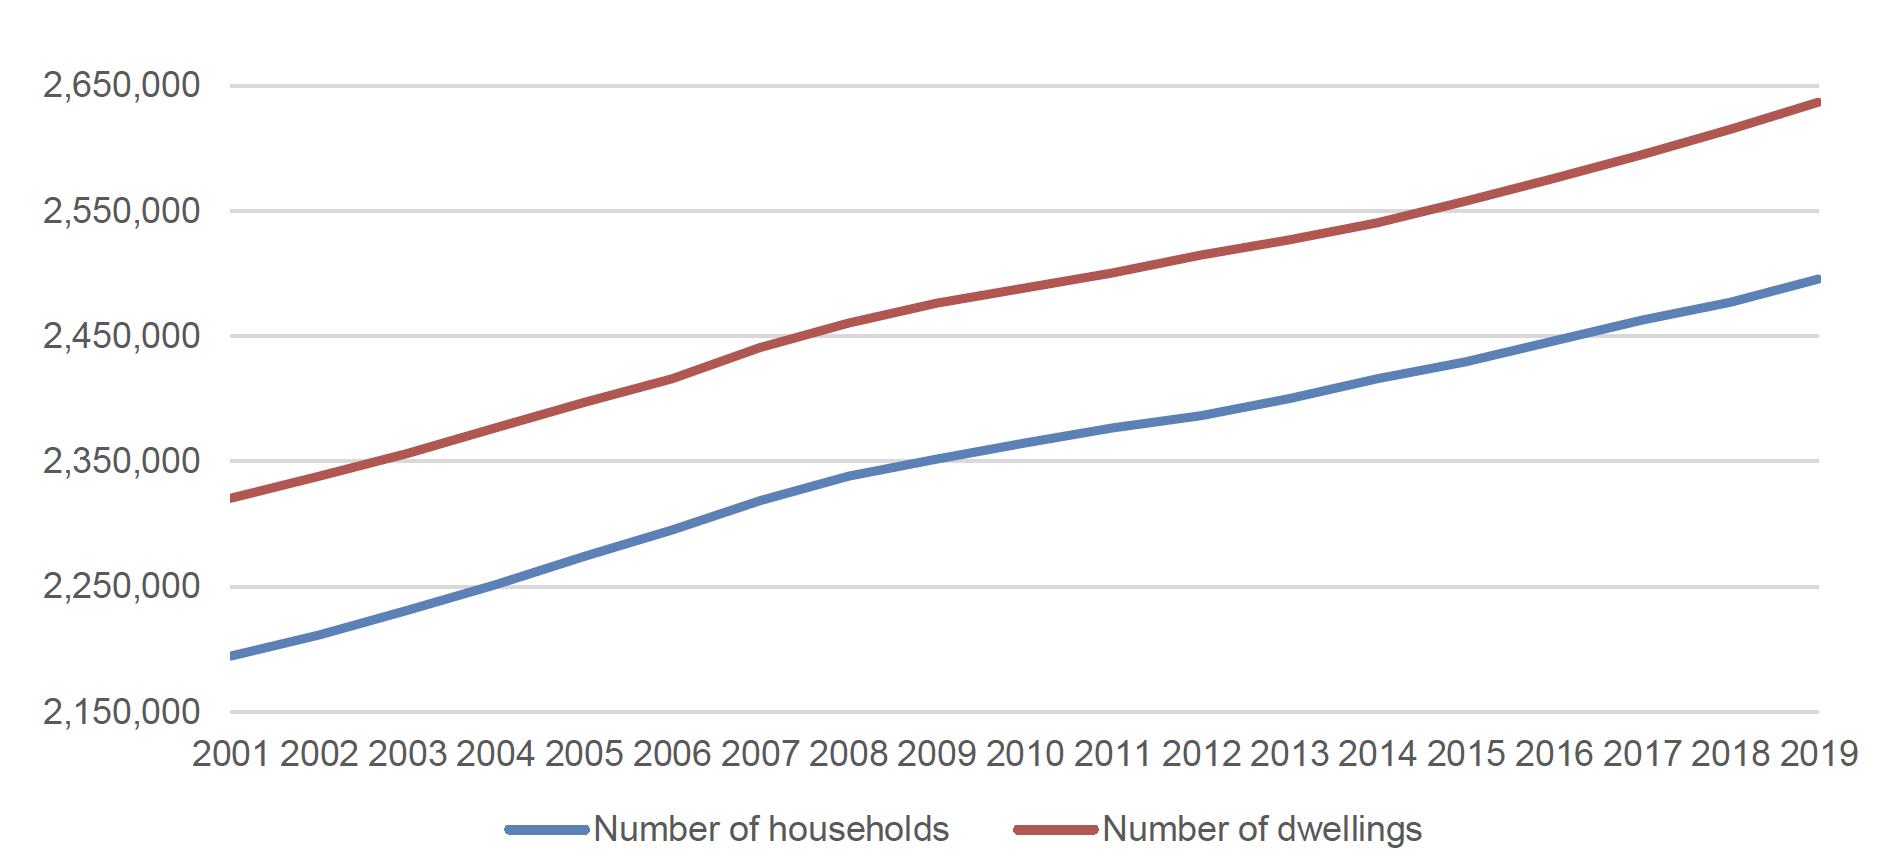 Graph showing that the number of households and dwellings in Scotland has increased steadily over the last 20 years.